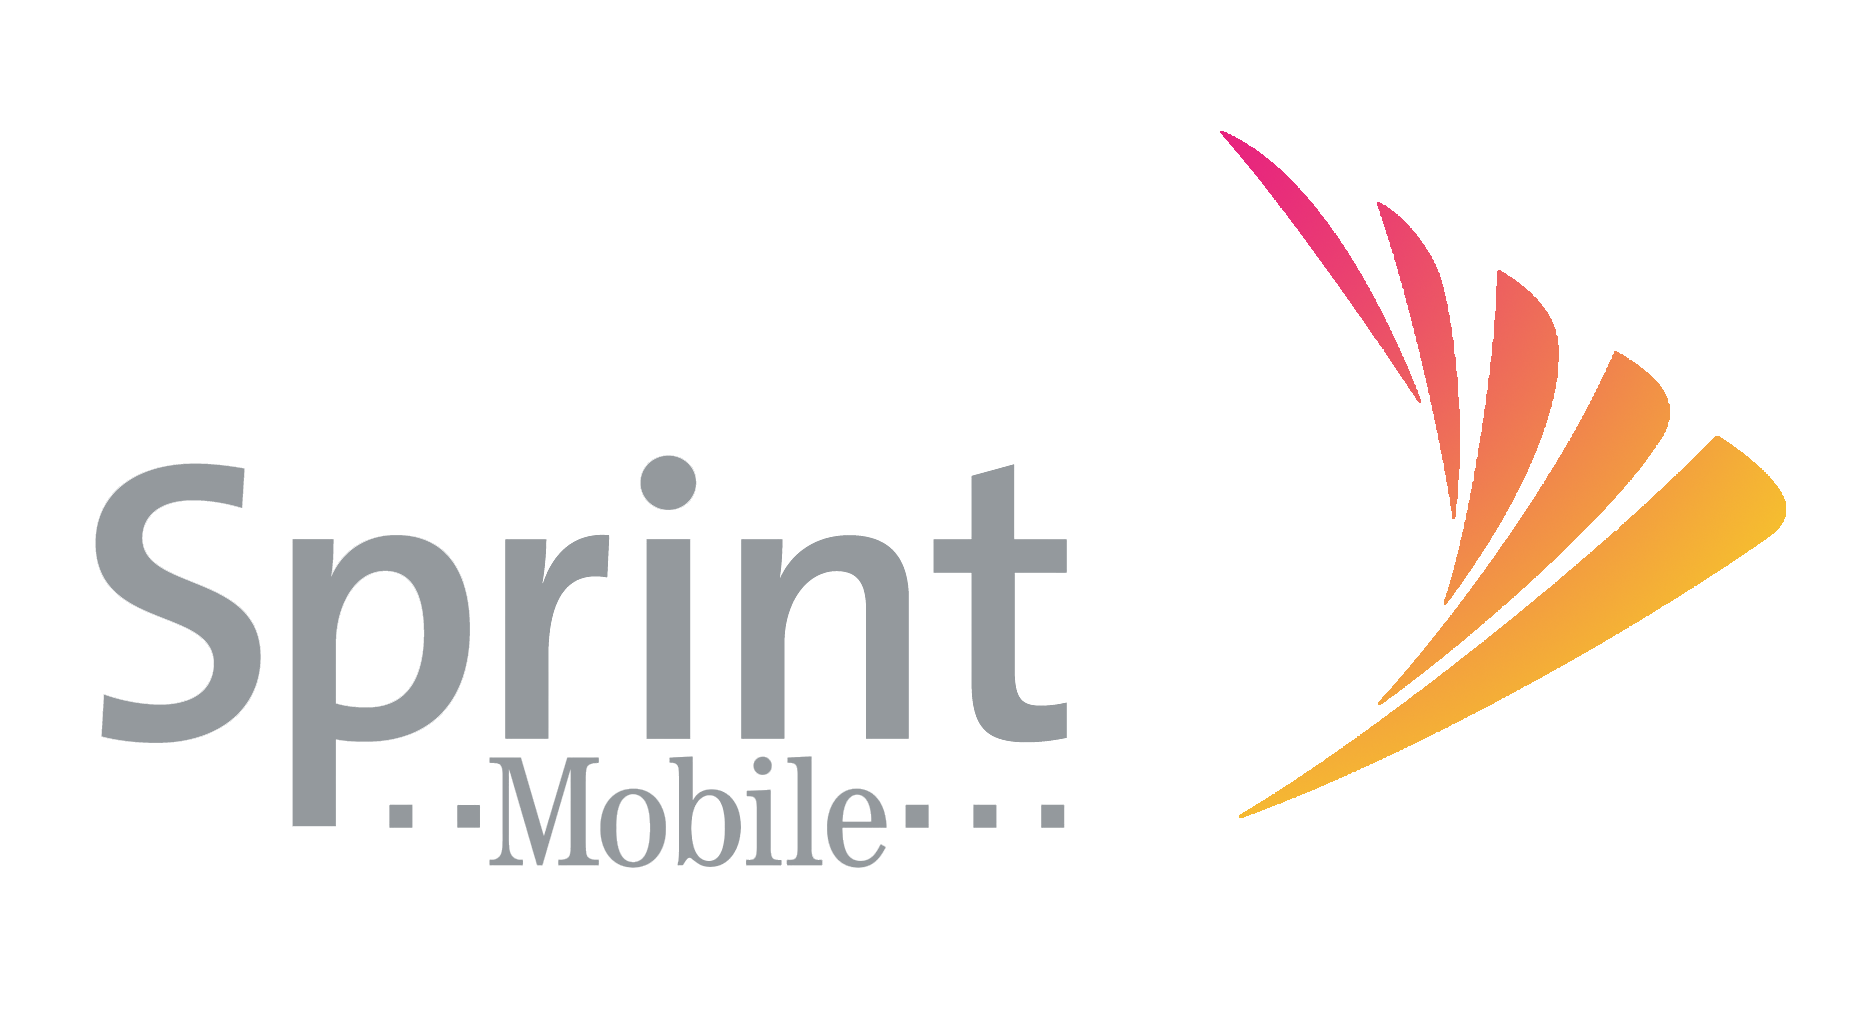 A Perspective T-Mobile Merger Could Energize Sprint